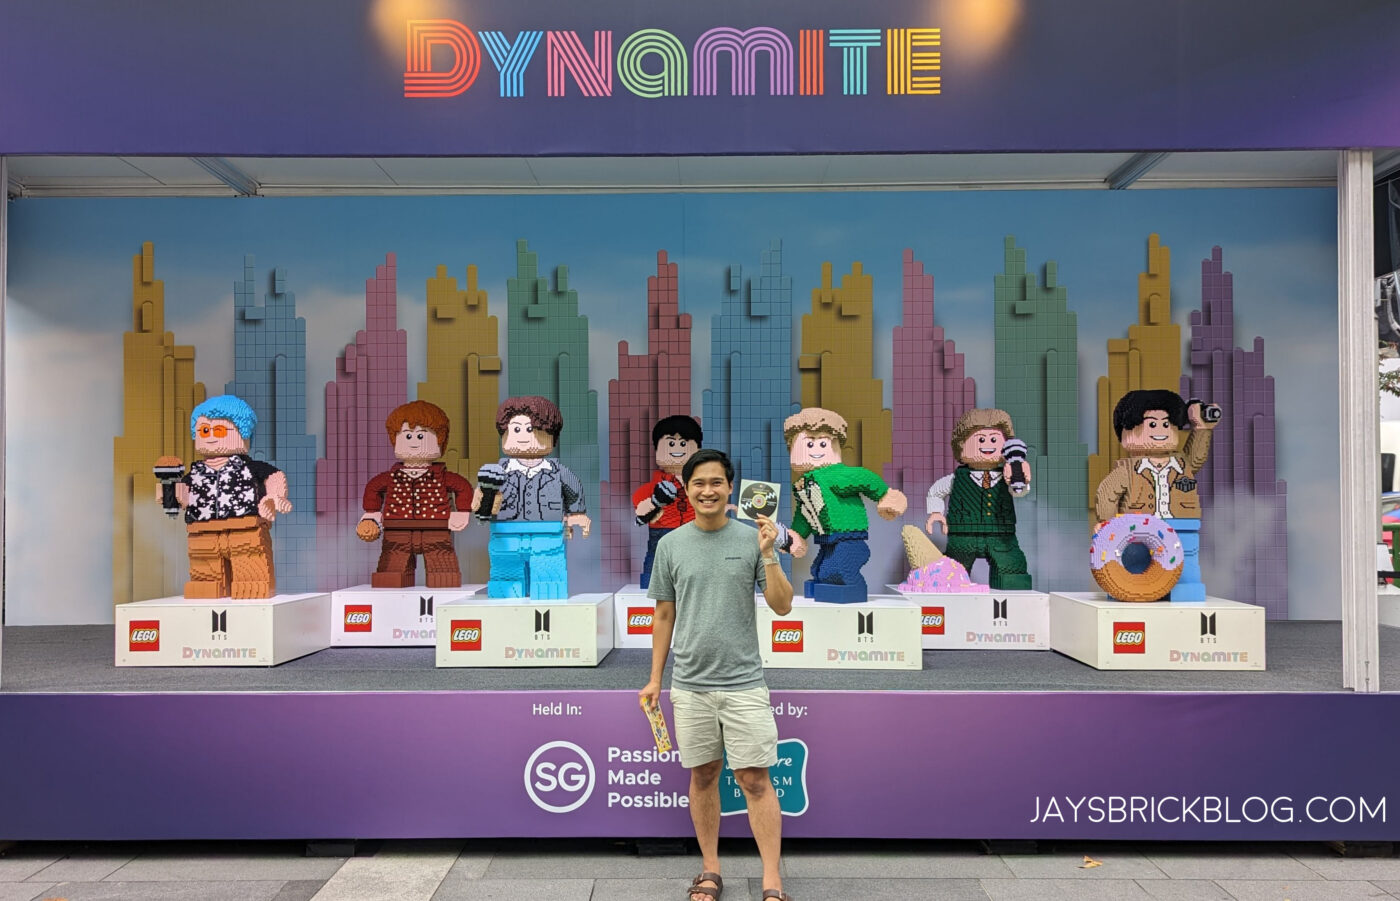 Here’s a look at the LEGO BTS Dynamite Pop-up at Orchard Road, Singapore43